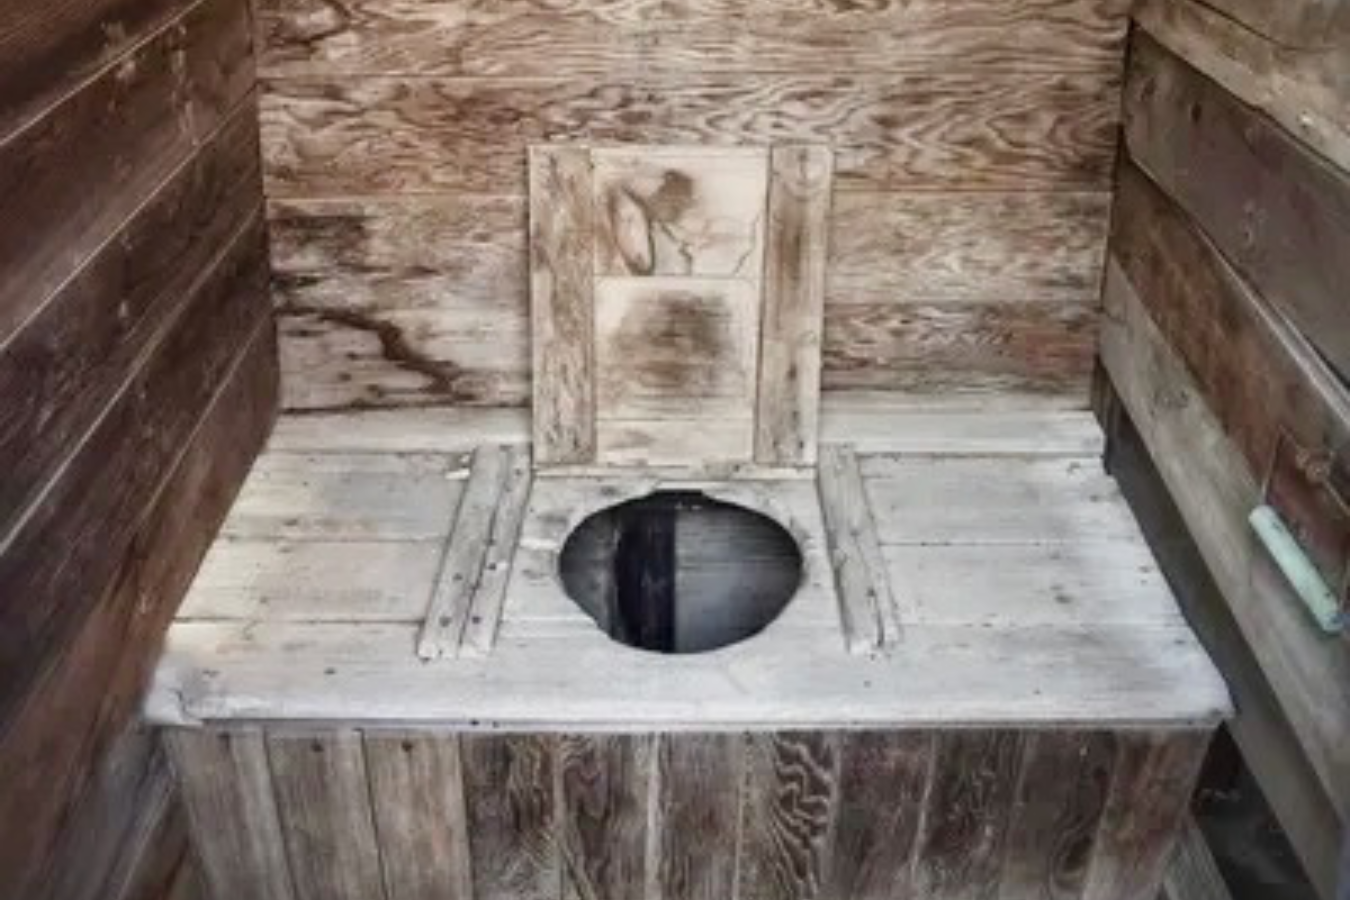 The Outhouse Image